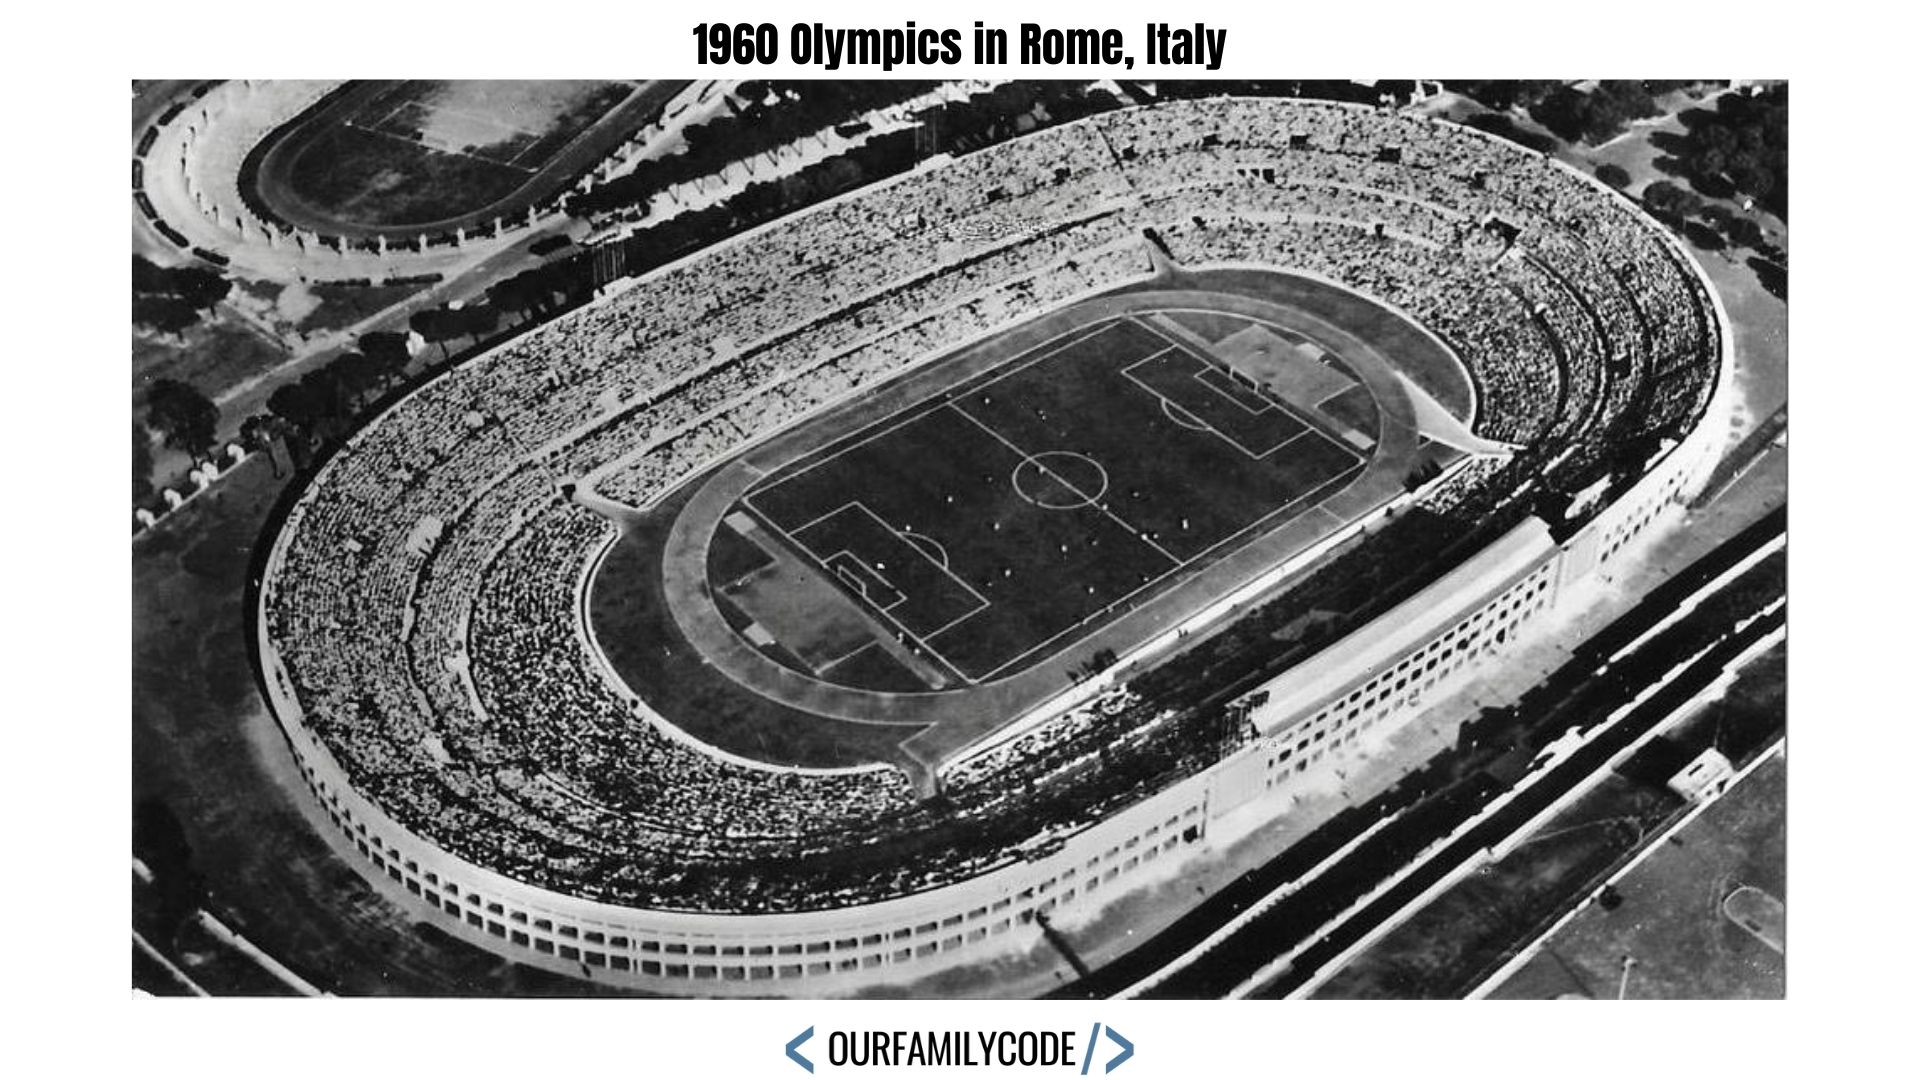 A panoramic view of the Olympic Stadium, "Stadio Olimpico", in Rome, Italy that was the official Olympic Stadium of the 1960 Summer Olympics.